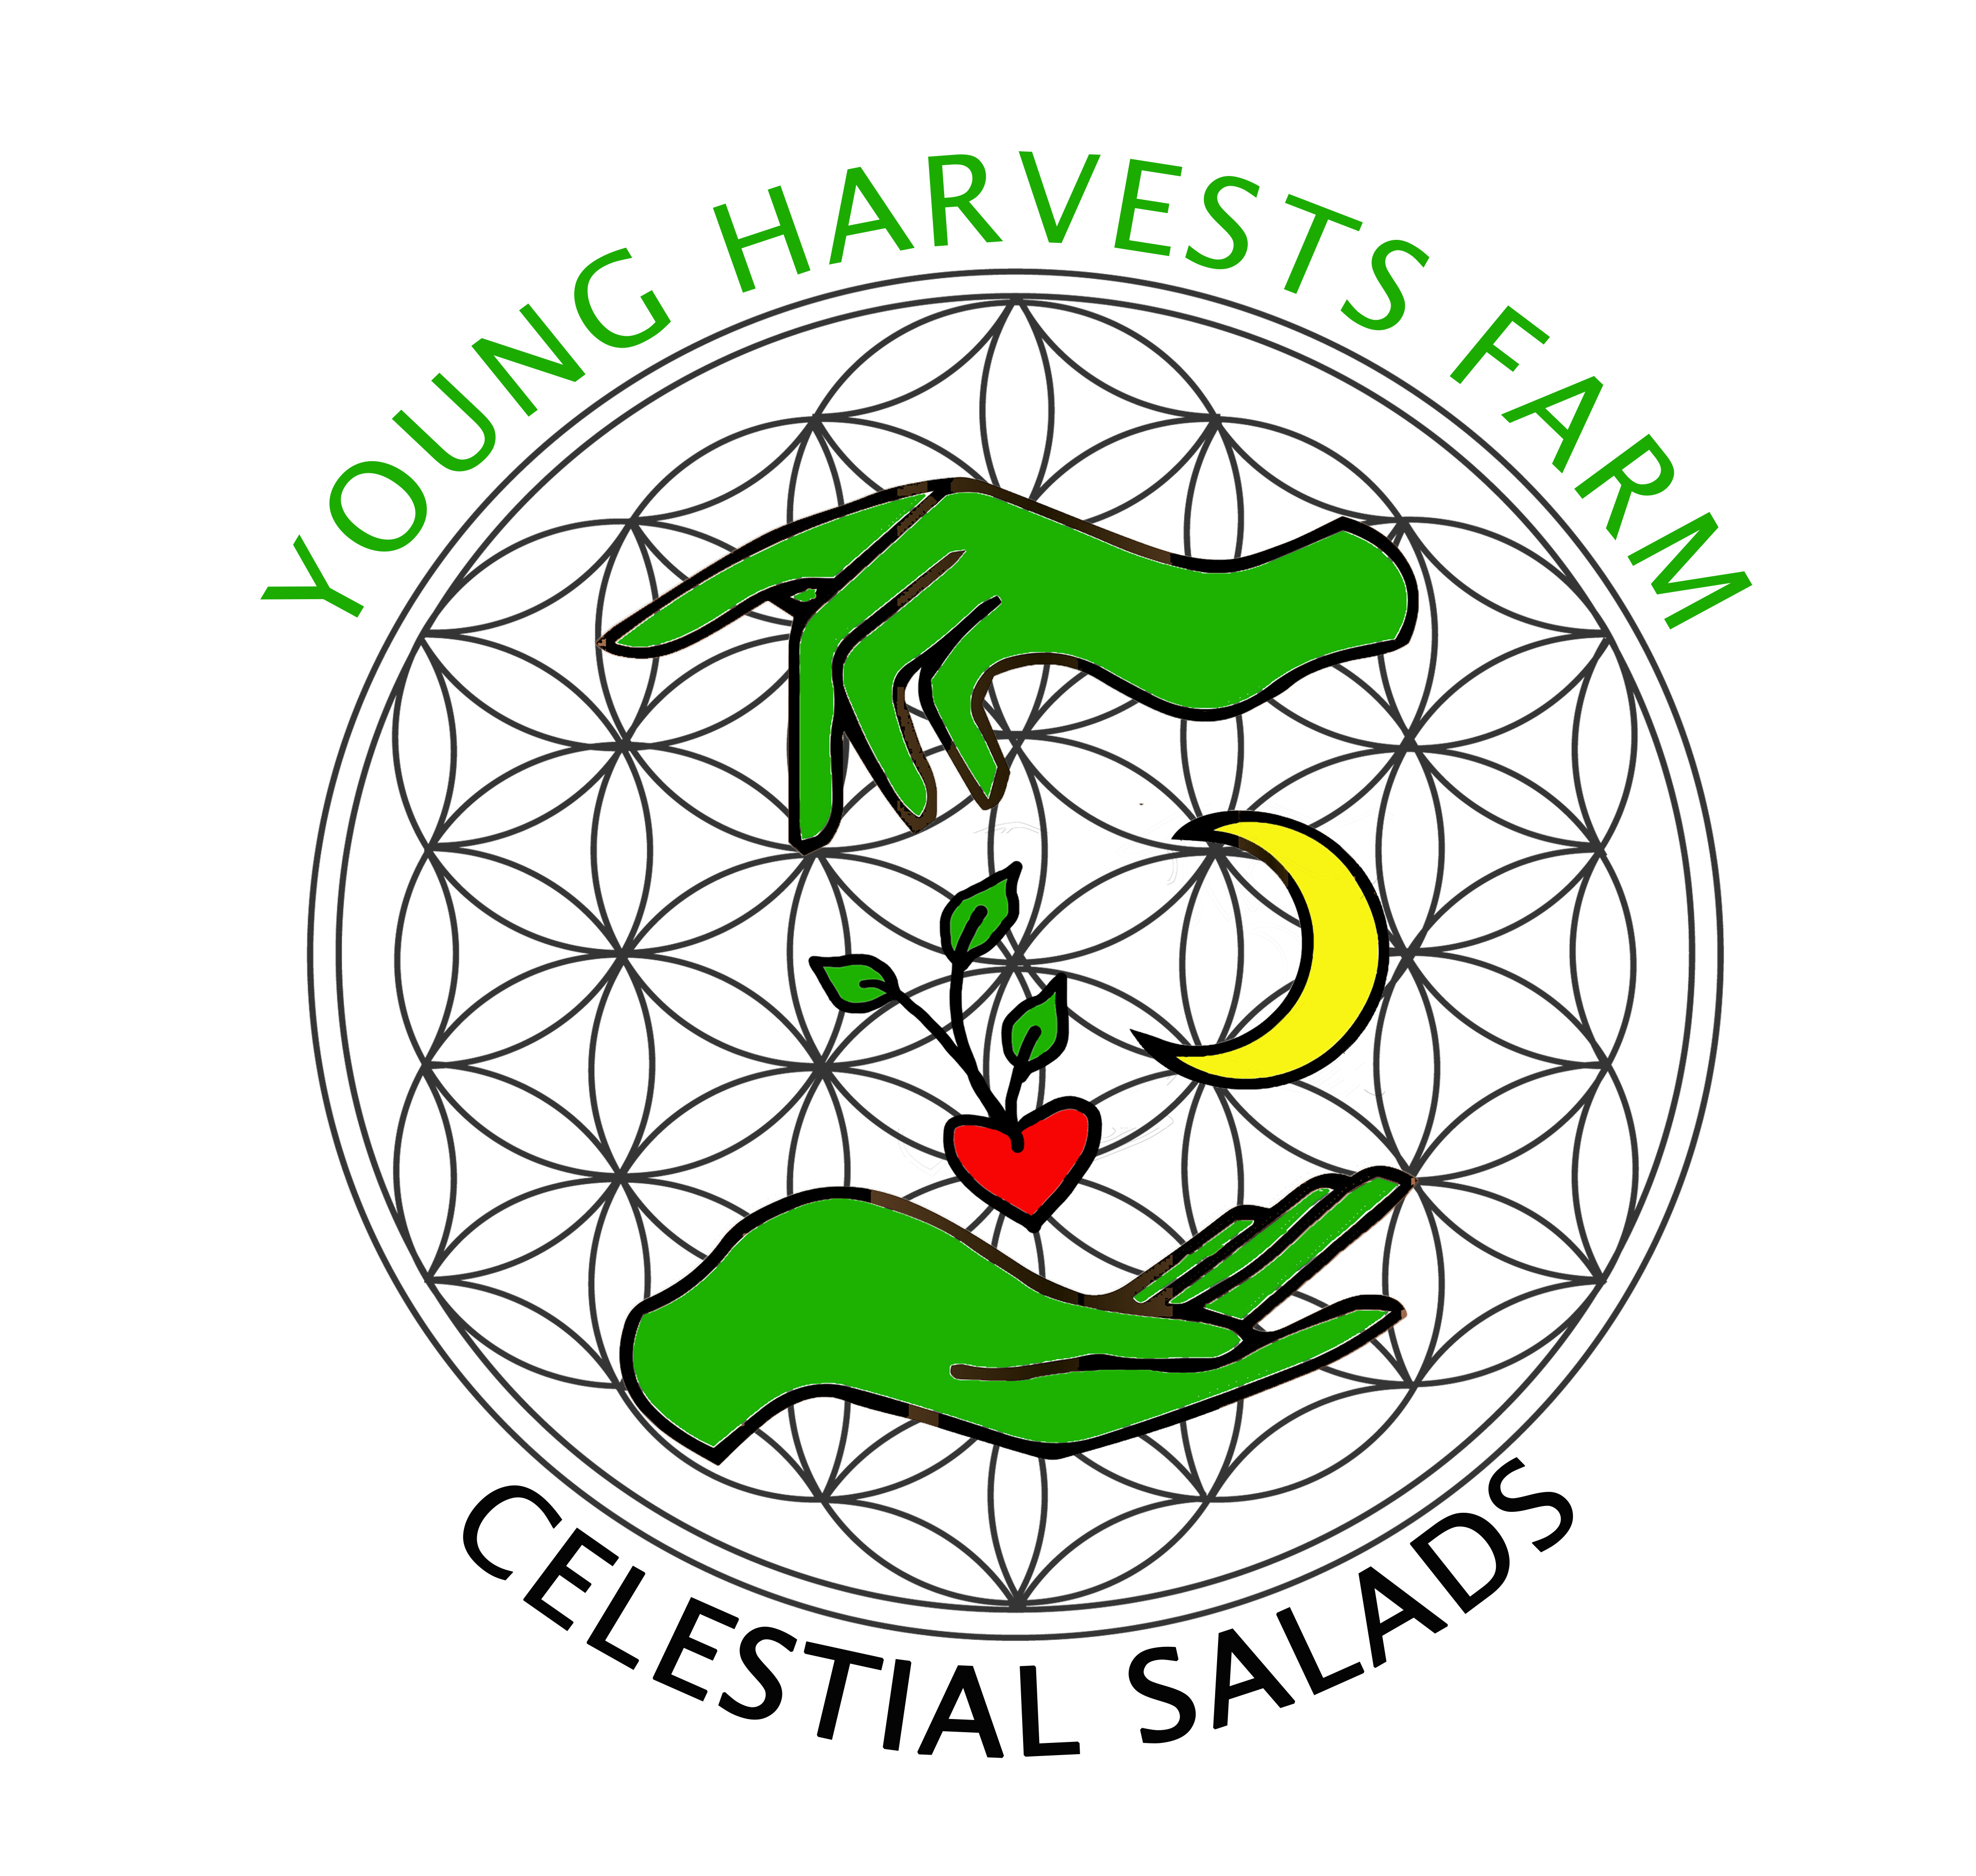 YOUNG HARVESTS FARM